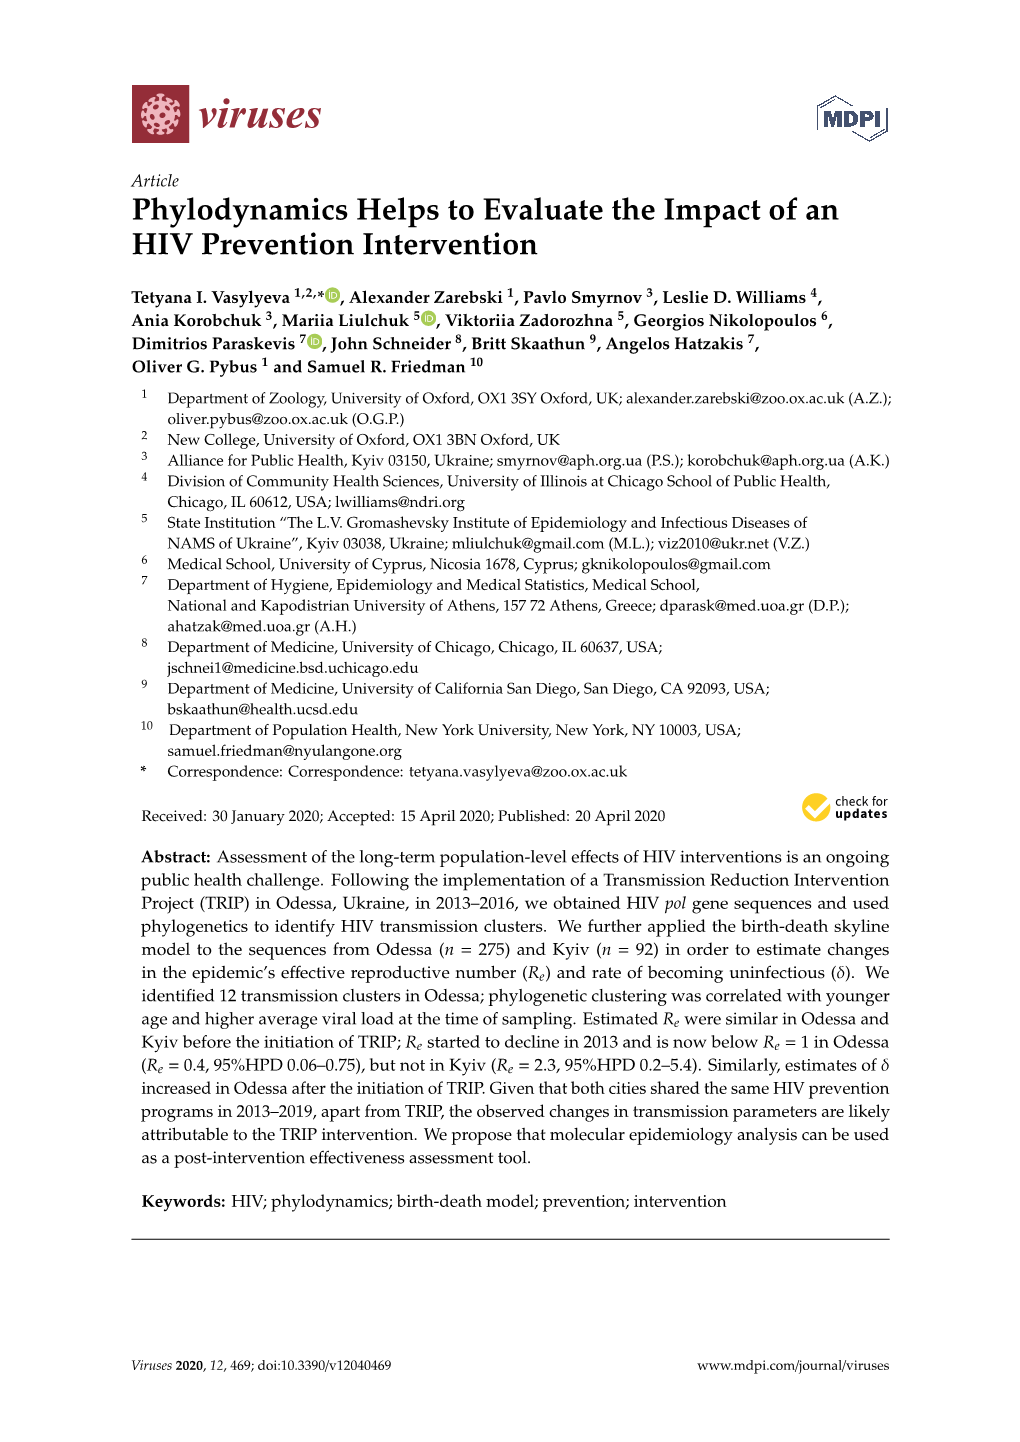 Phylodynamics Helps to Evaluate the Impact of an HIV Prevention Intervention